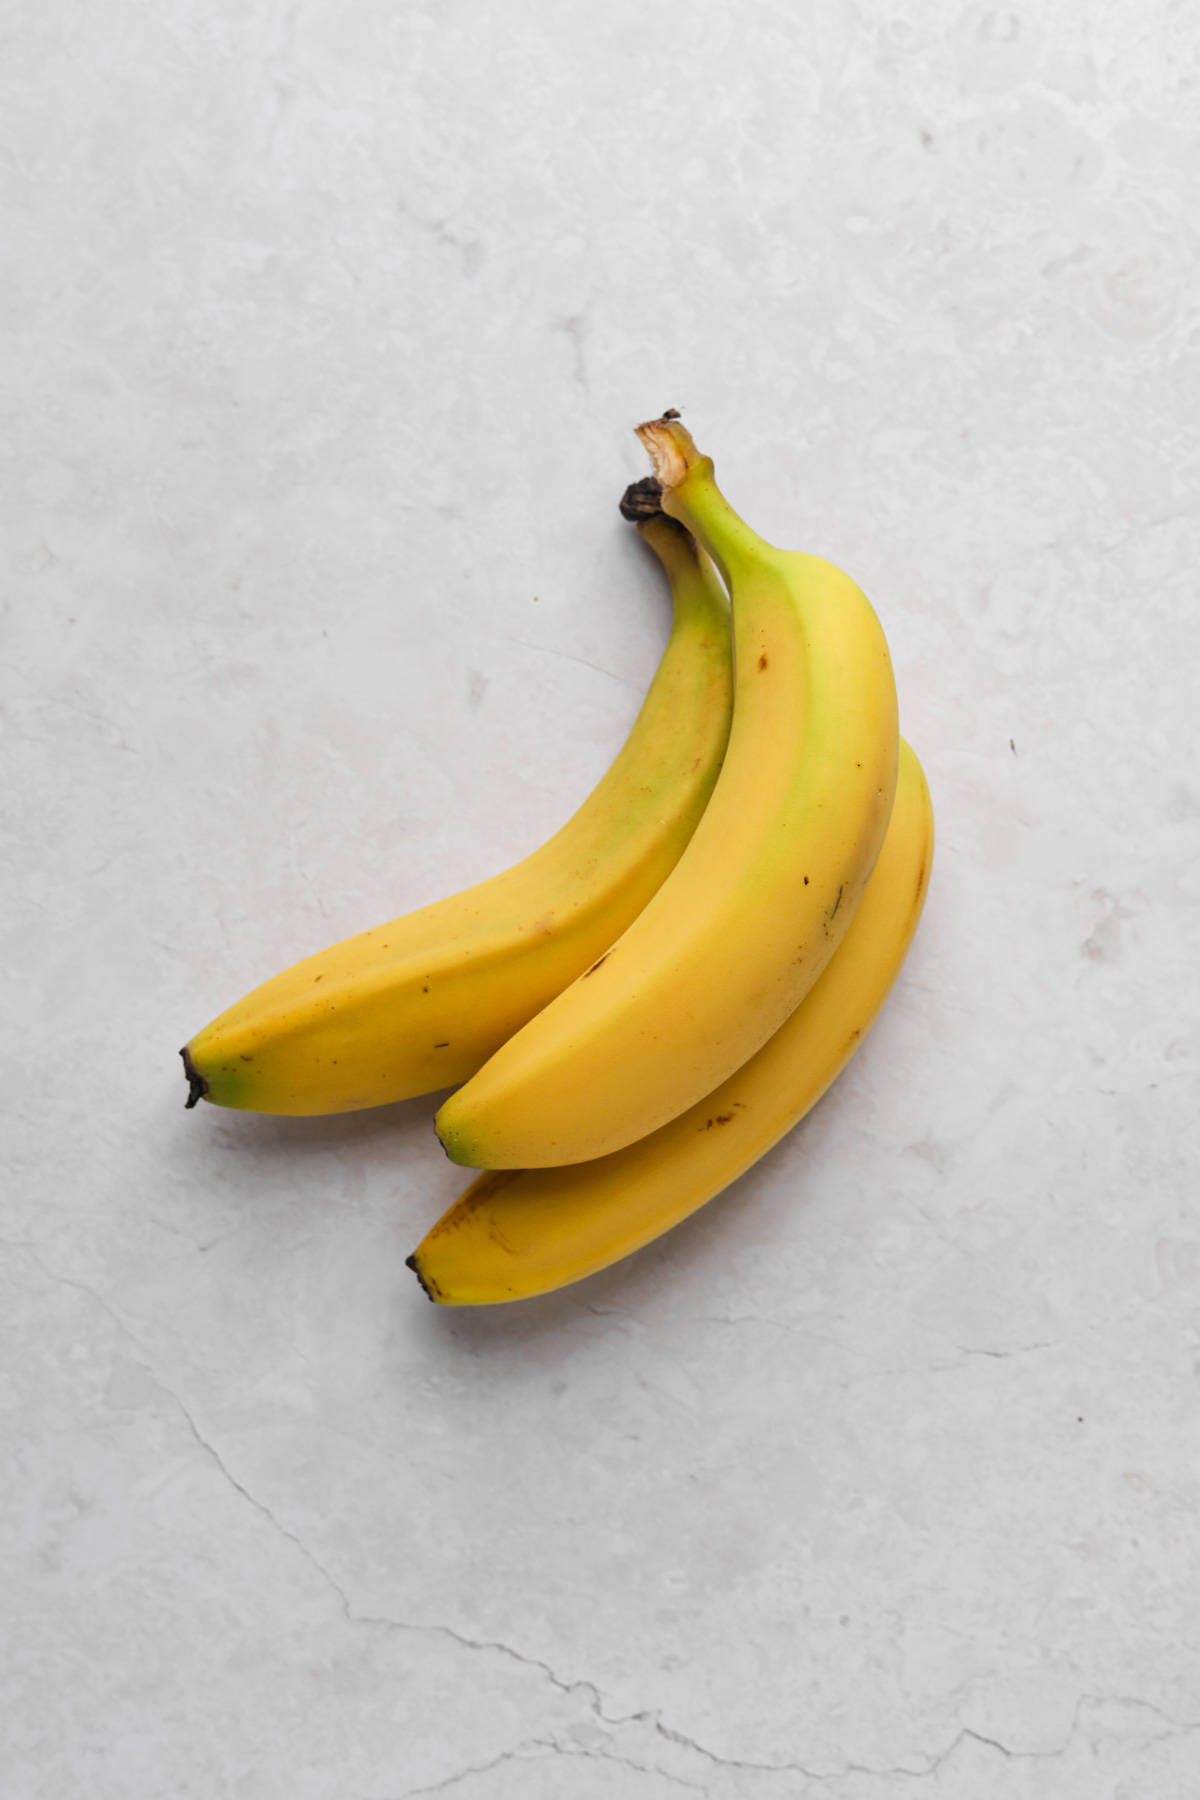 Bunch of three bananas on a flat surface.